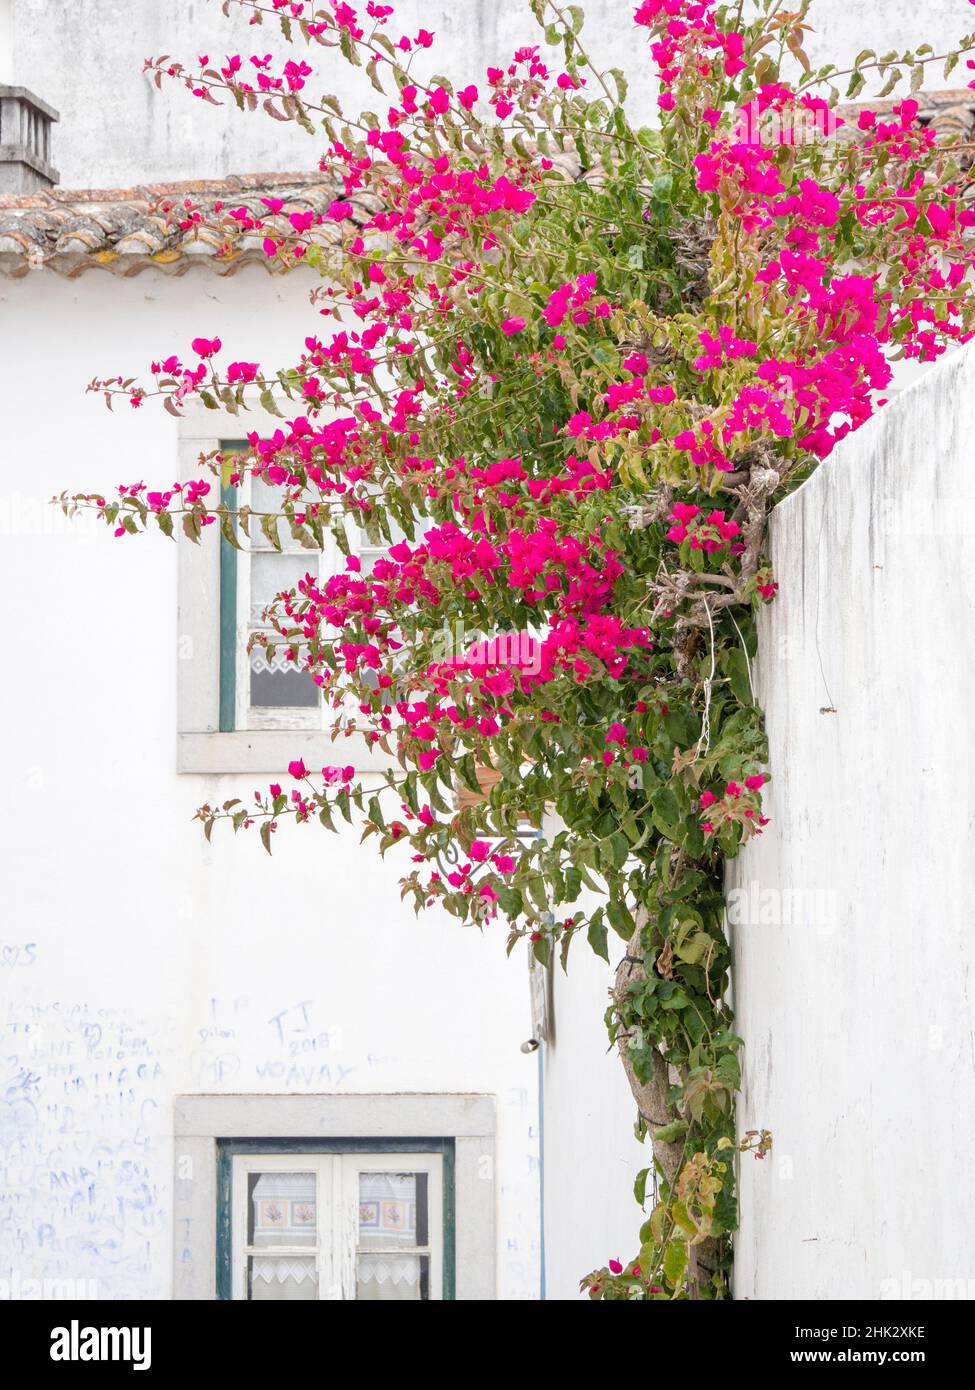 Portugal, Obidos. Hot pink bougainvillea vine growing over a white wall in the walled town of Obidos. Stock Photo